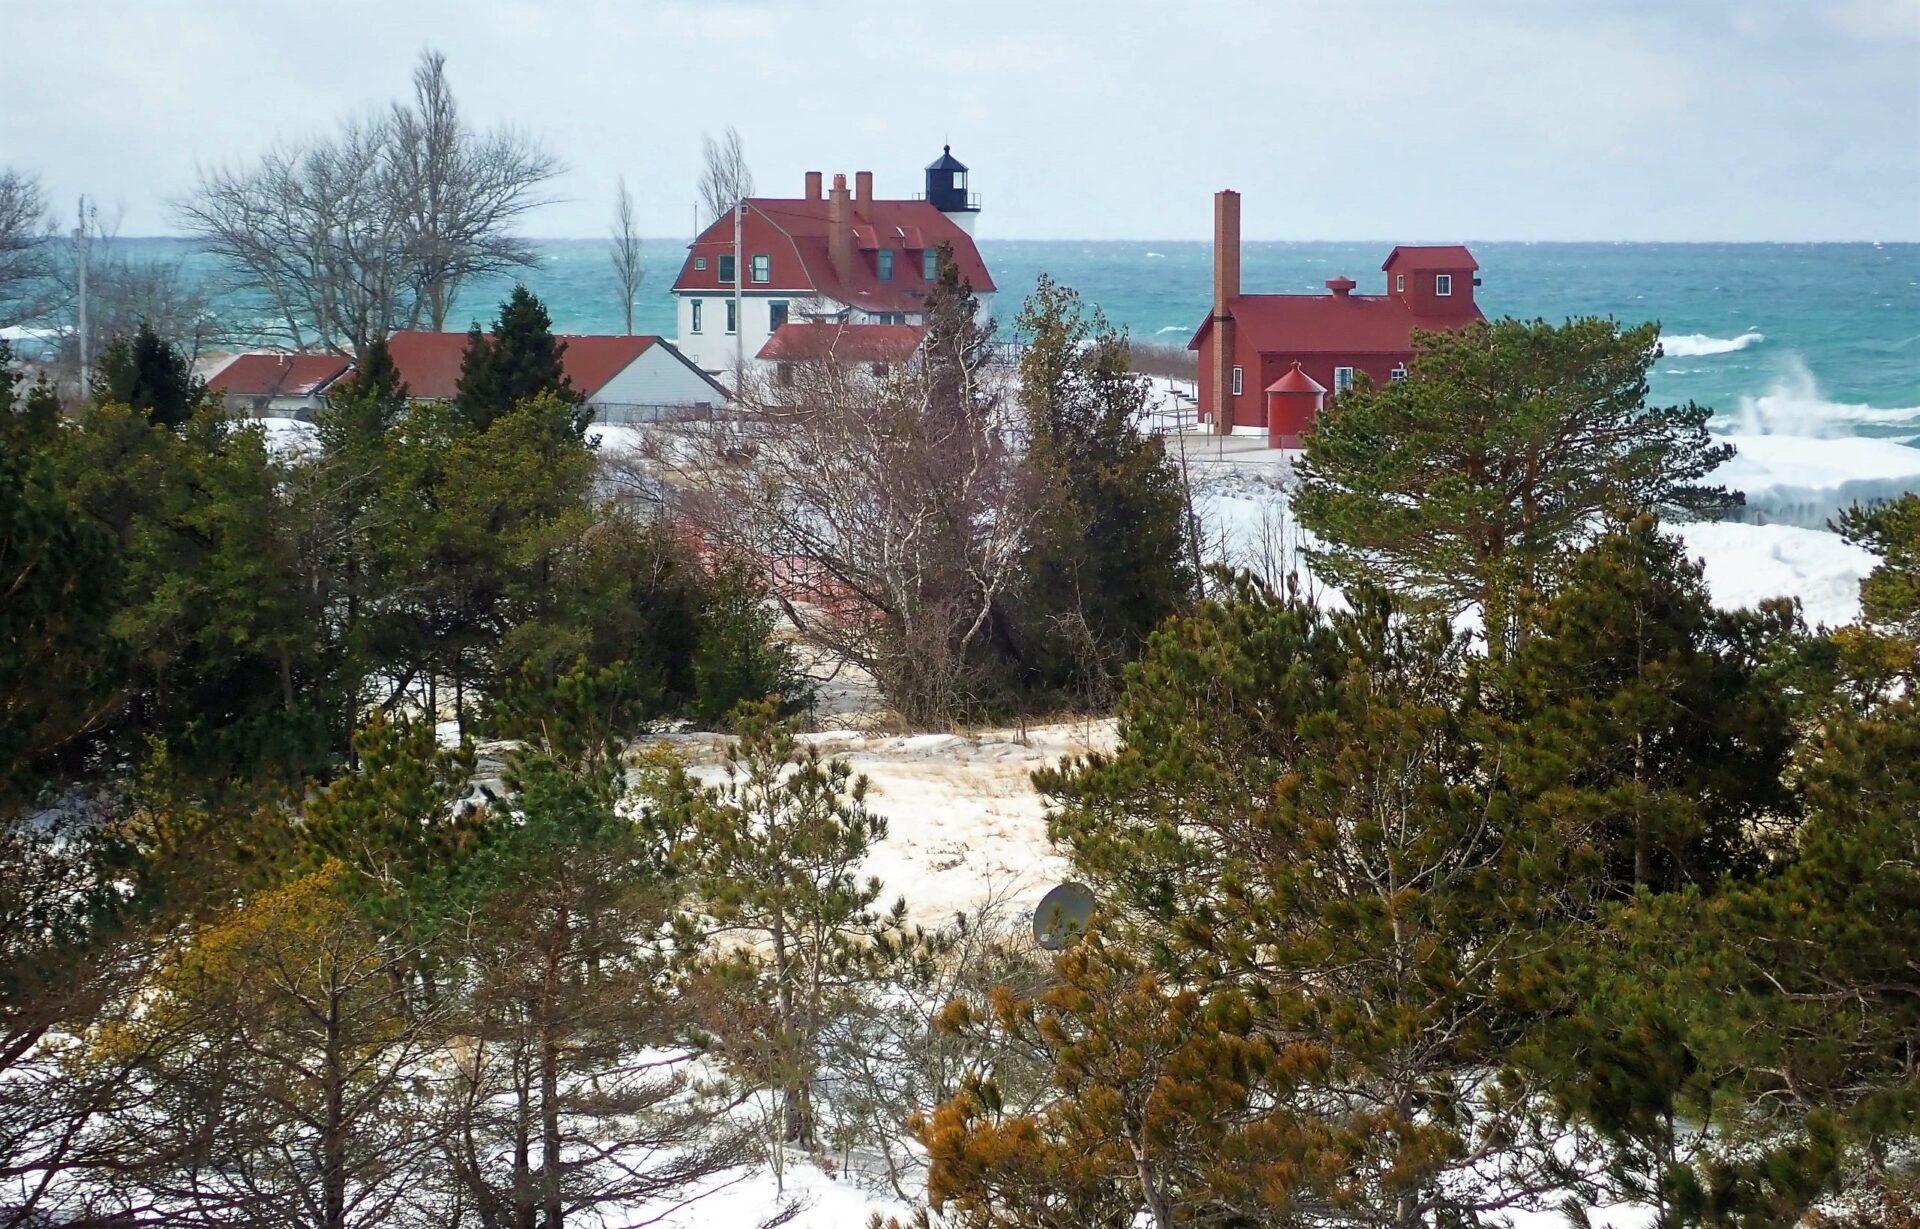 Things to do in Frankfort, Michigan